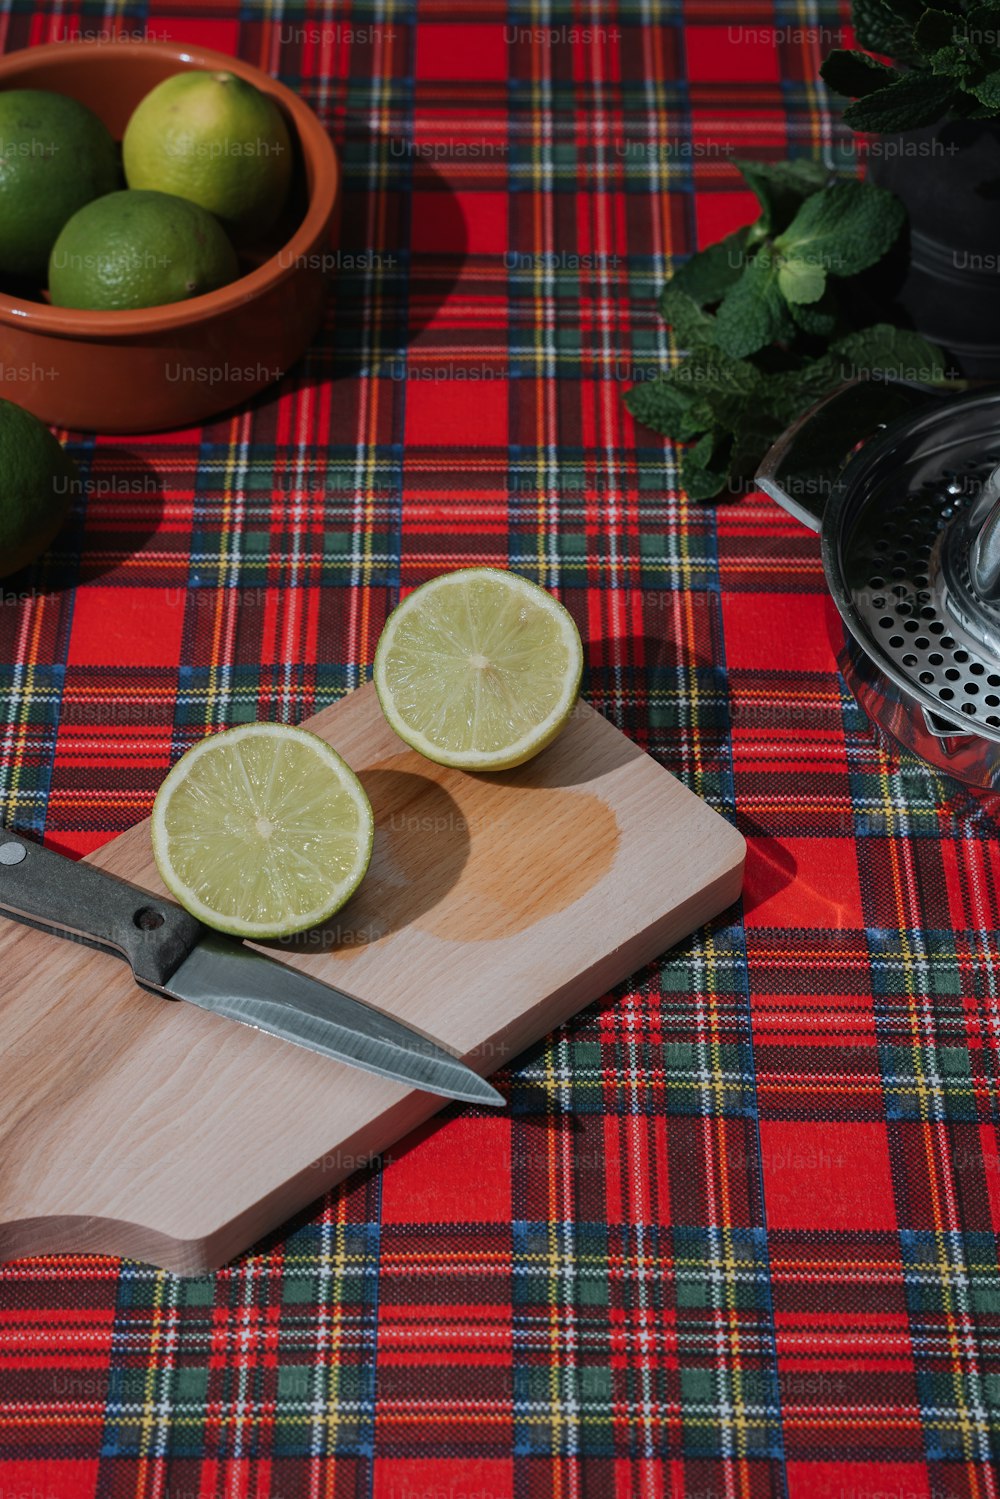 a cutting board with two limes on it